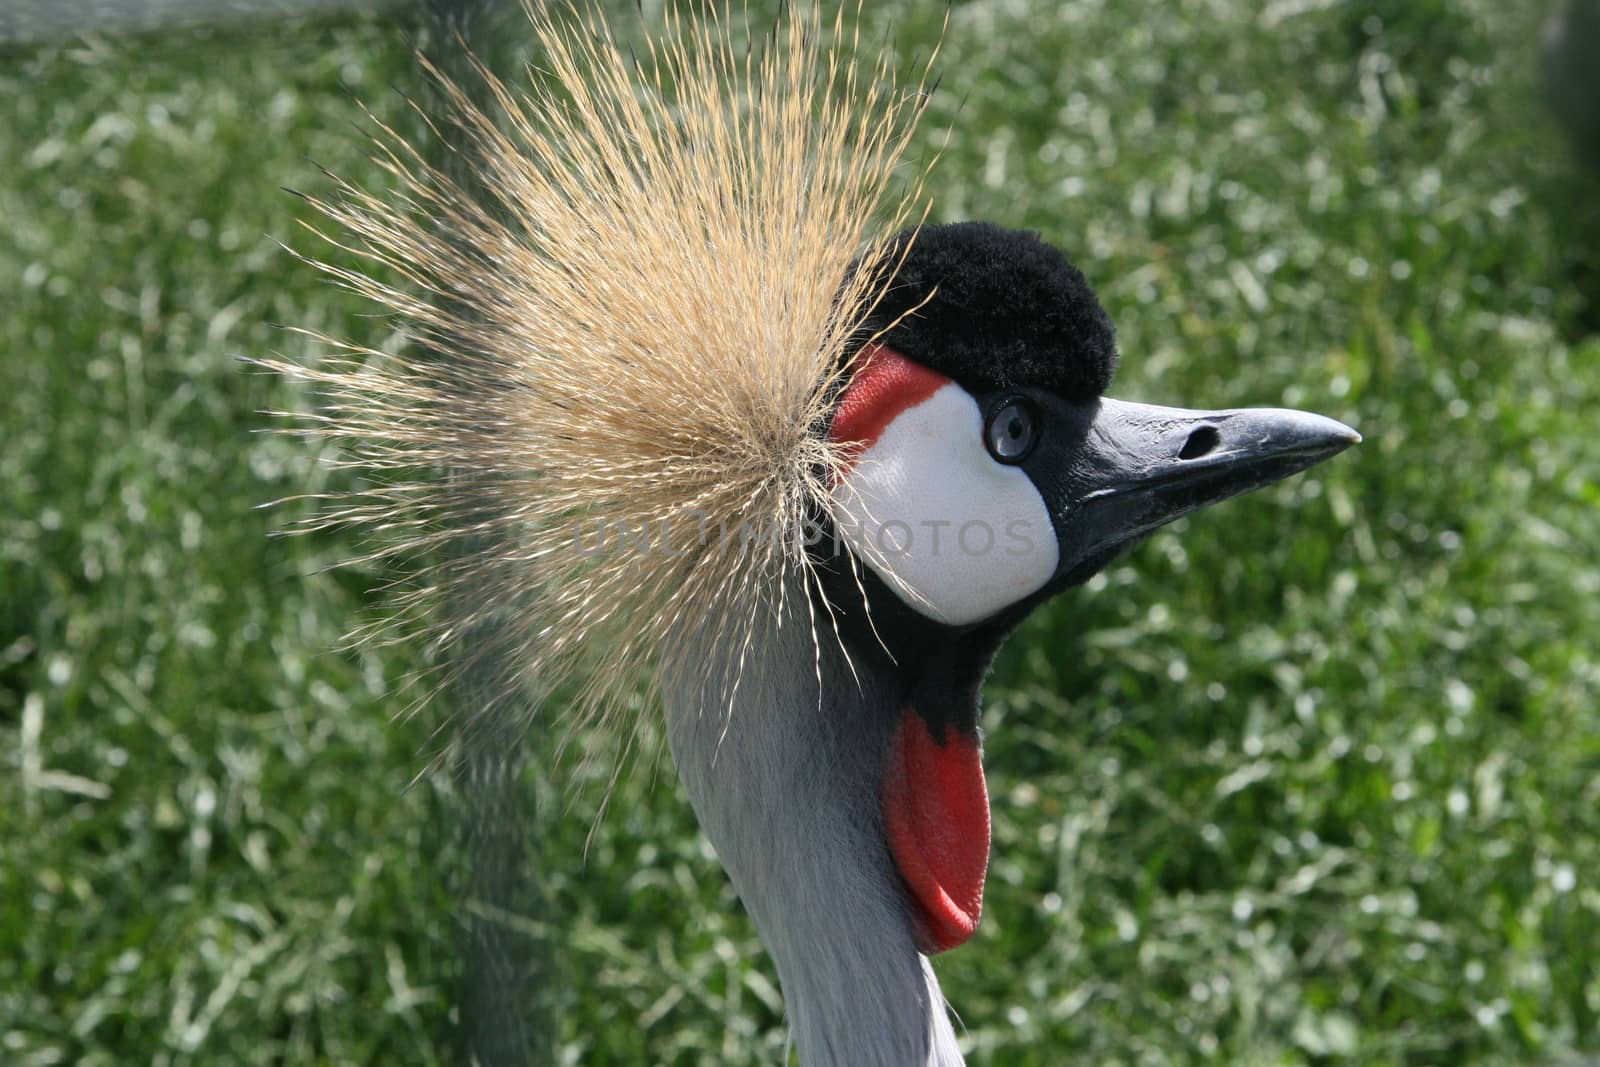 Crowned crane by Carratera